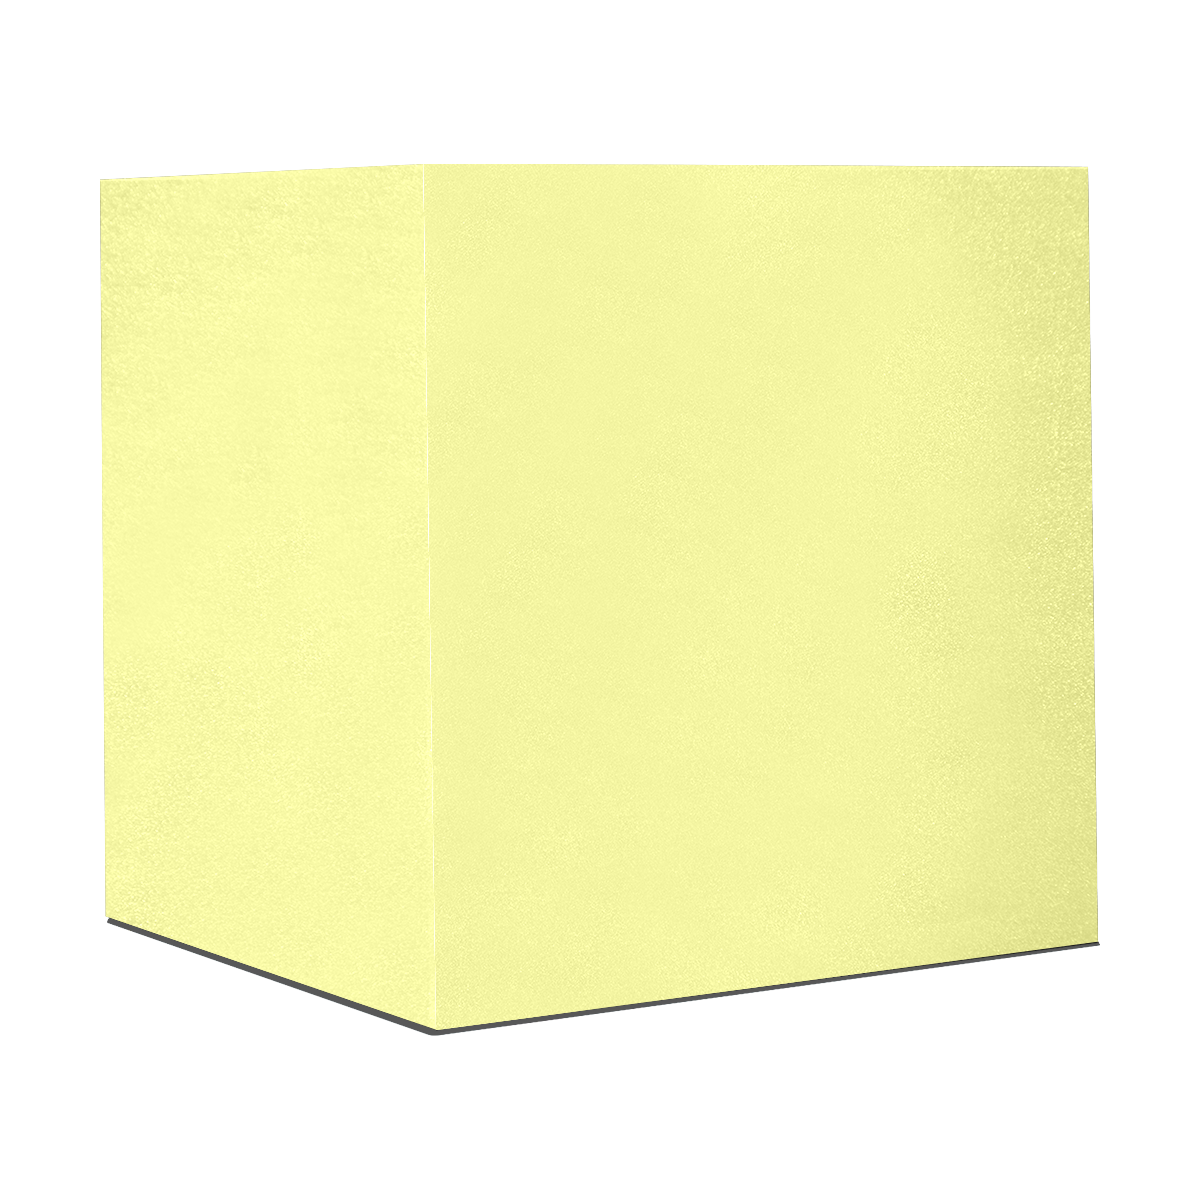 color canary yellow Gift Wrapping Paper 58"x 23" (1 Roll)